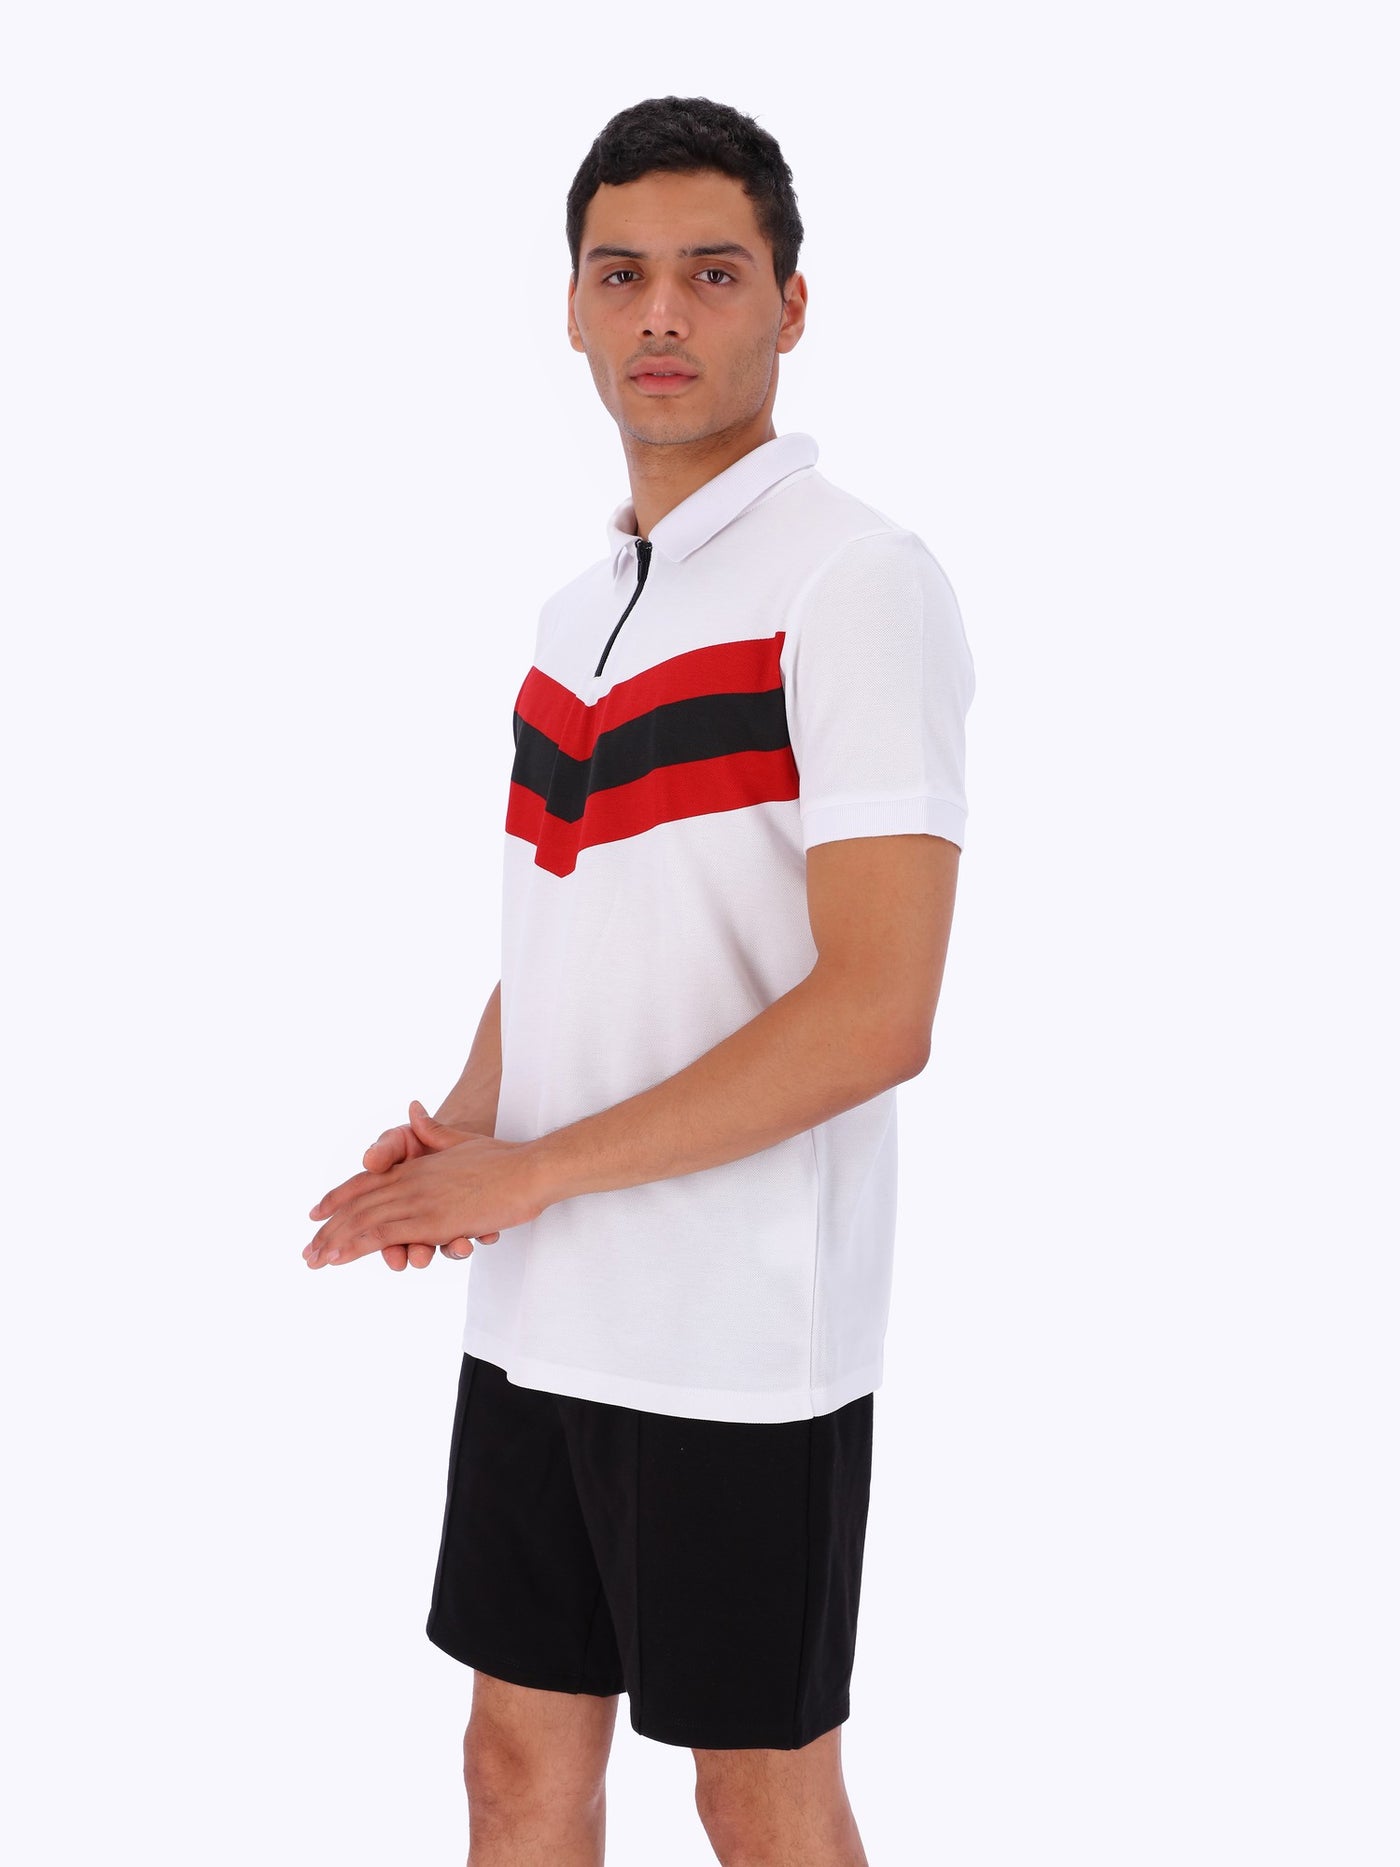 OR Men's Zip Front Striped Polo Shirt